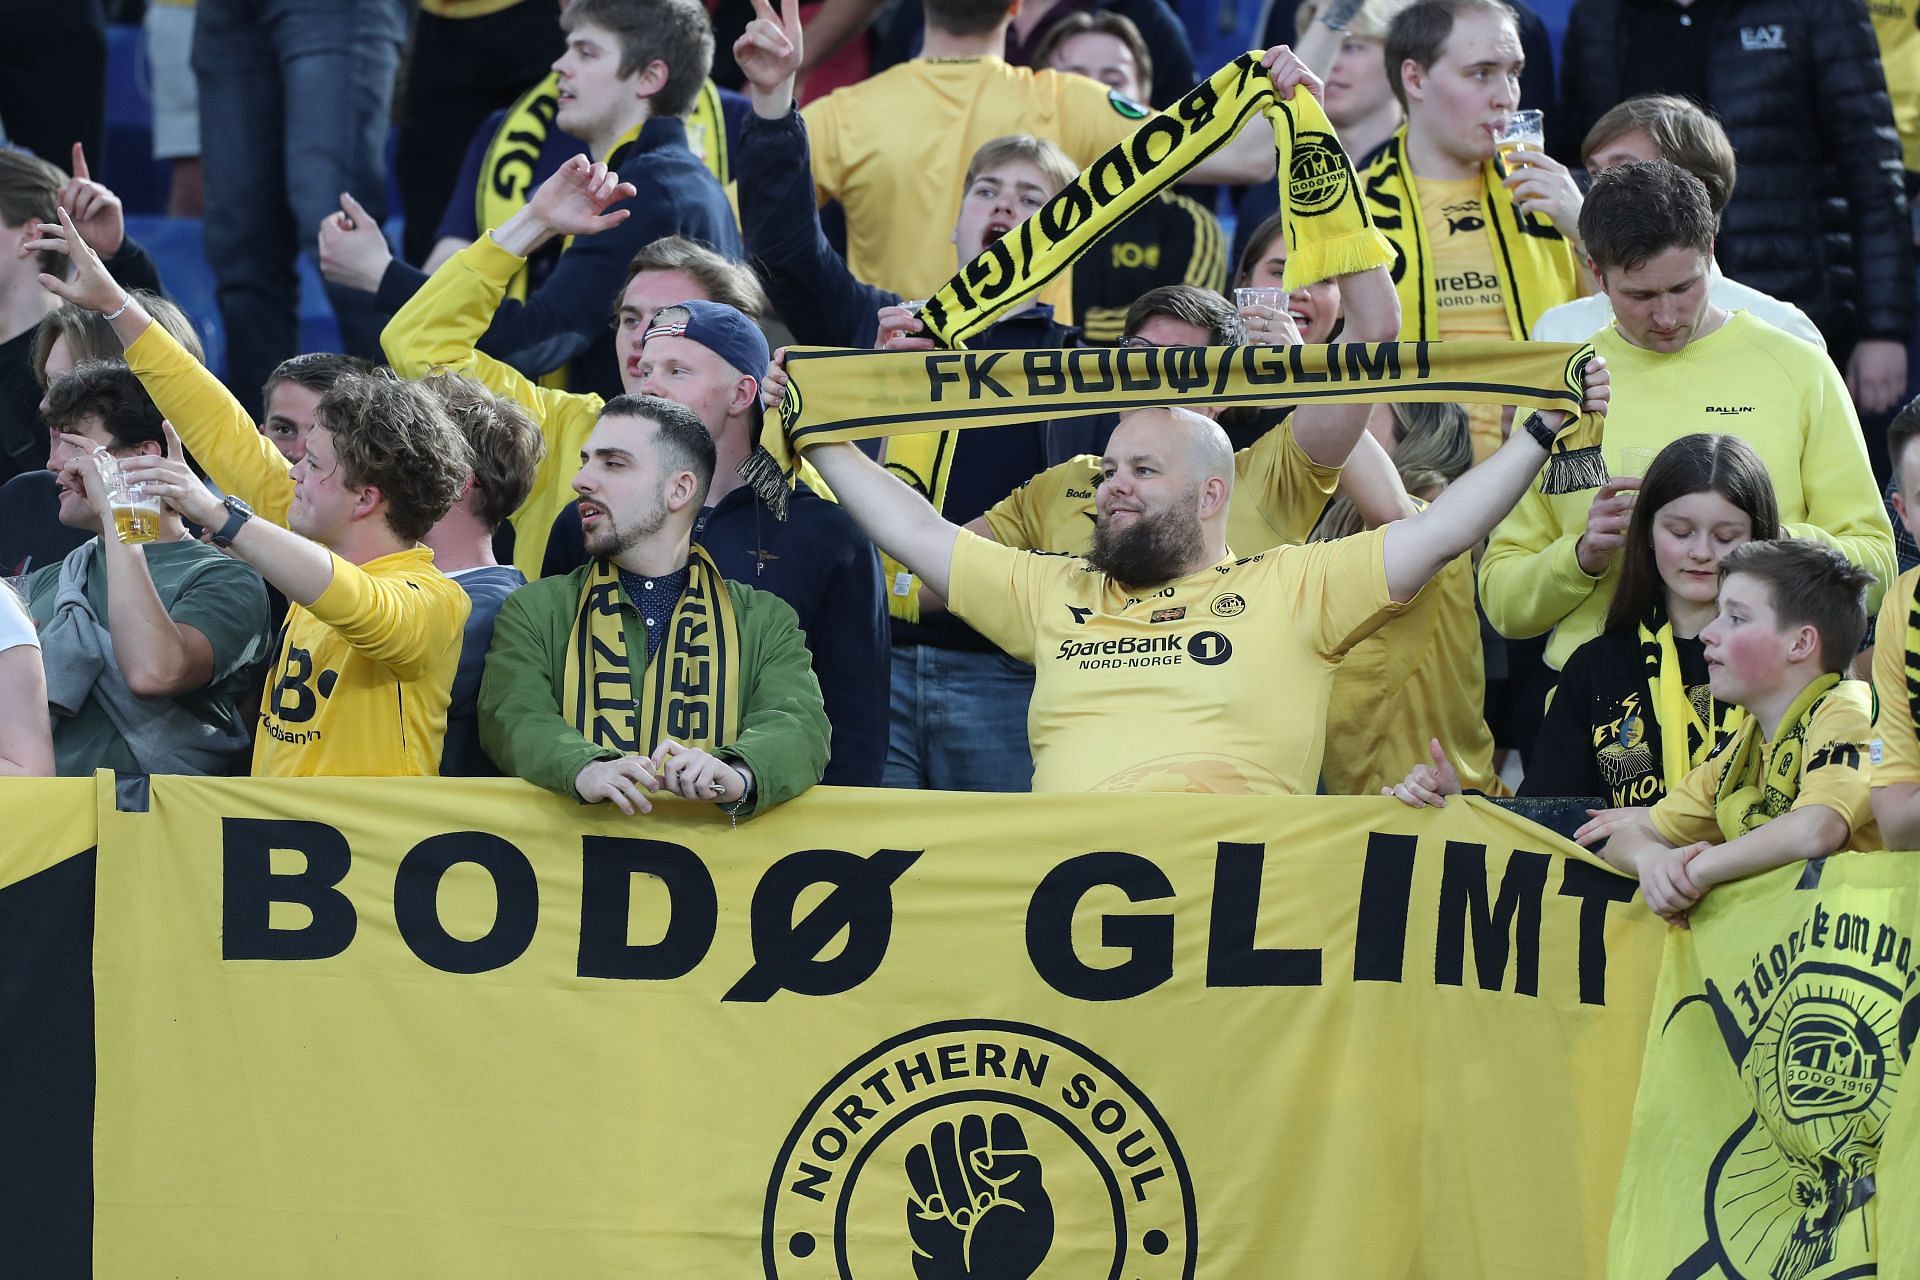 Bodo/Glimt will be looking to win the game